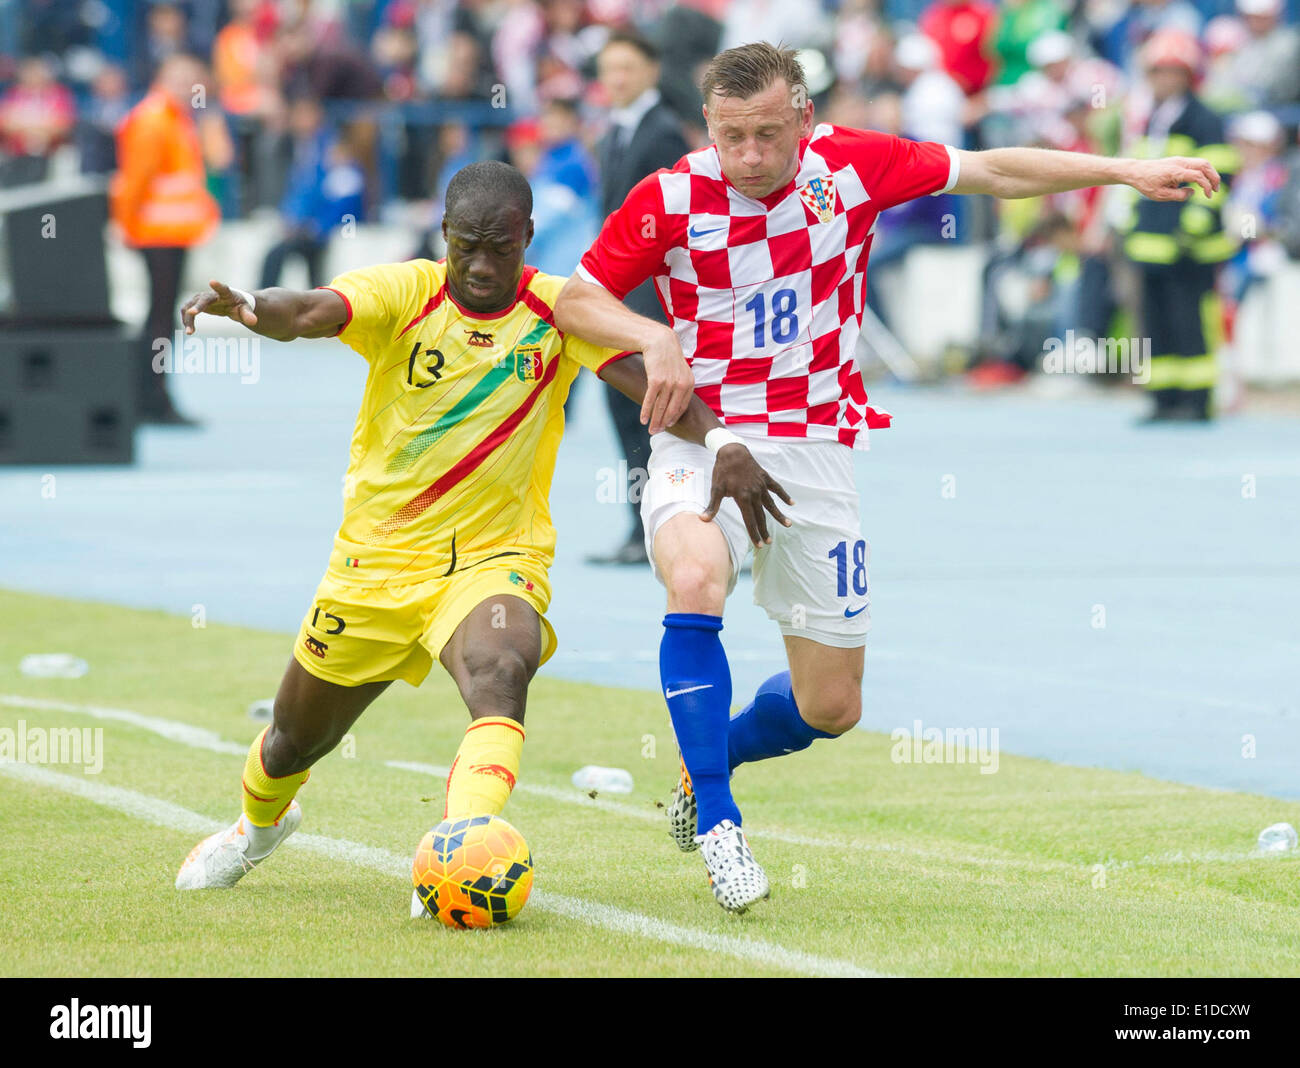 Osijek, Croatia. 31st May, 2014. Ivica Olic of Croatia (R) vies with Idrissa Coulibaly of Mali during the friendly match in Osijek, Croatia, May 31, 2014. Croatia won 2-1. Croatia will play Brazil in the opening game of the 2014 World Cup in Sao Paulo on June 12. Credit:  Miso Lisanin/Xinhua/Alamy Live News Stock Photo